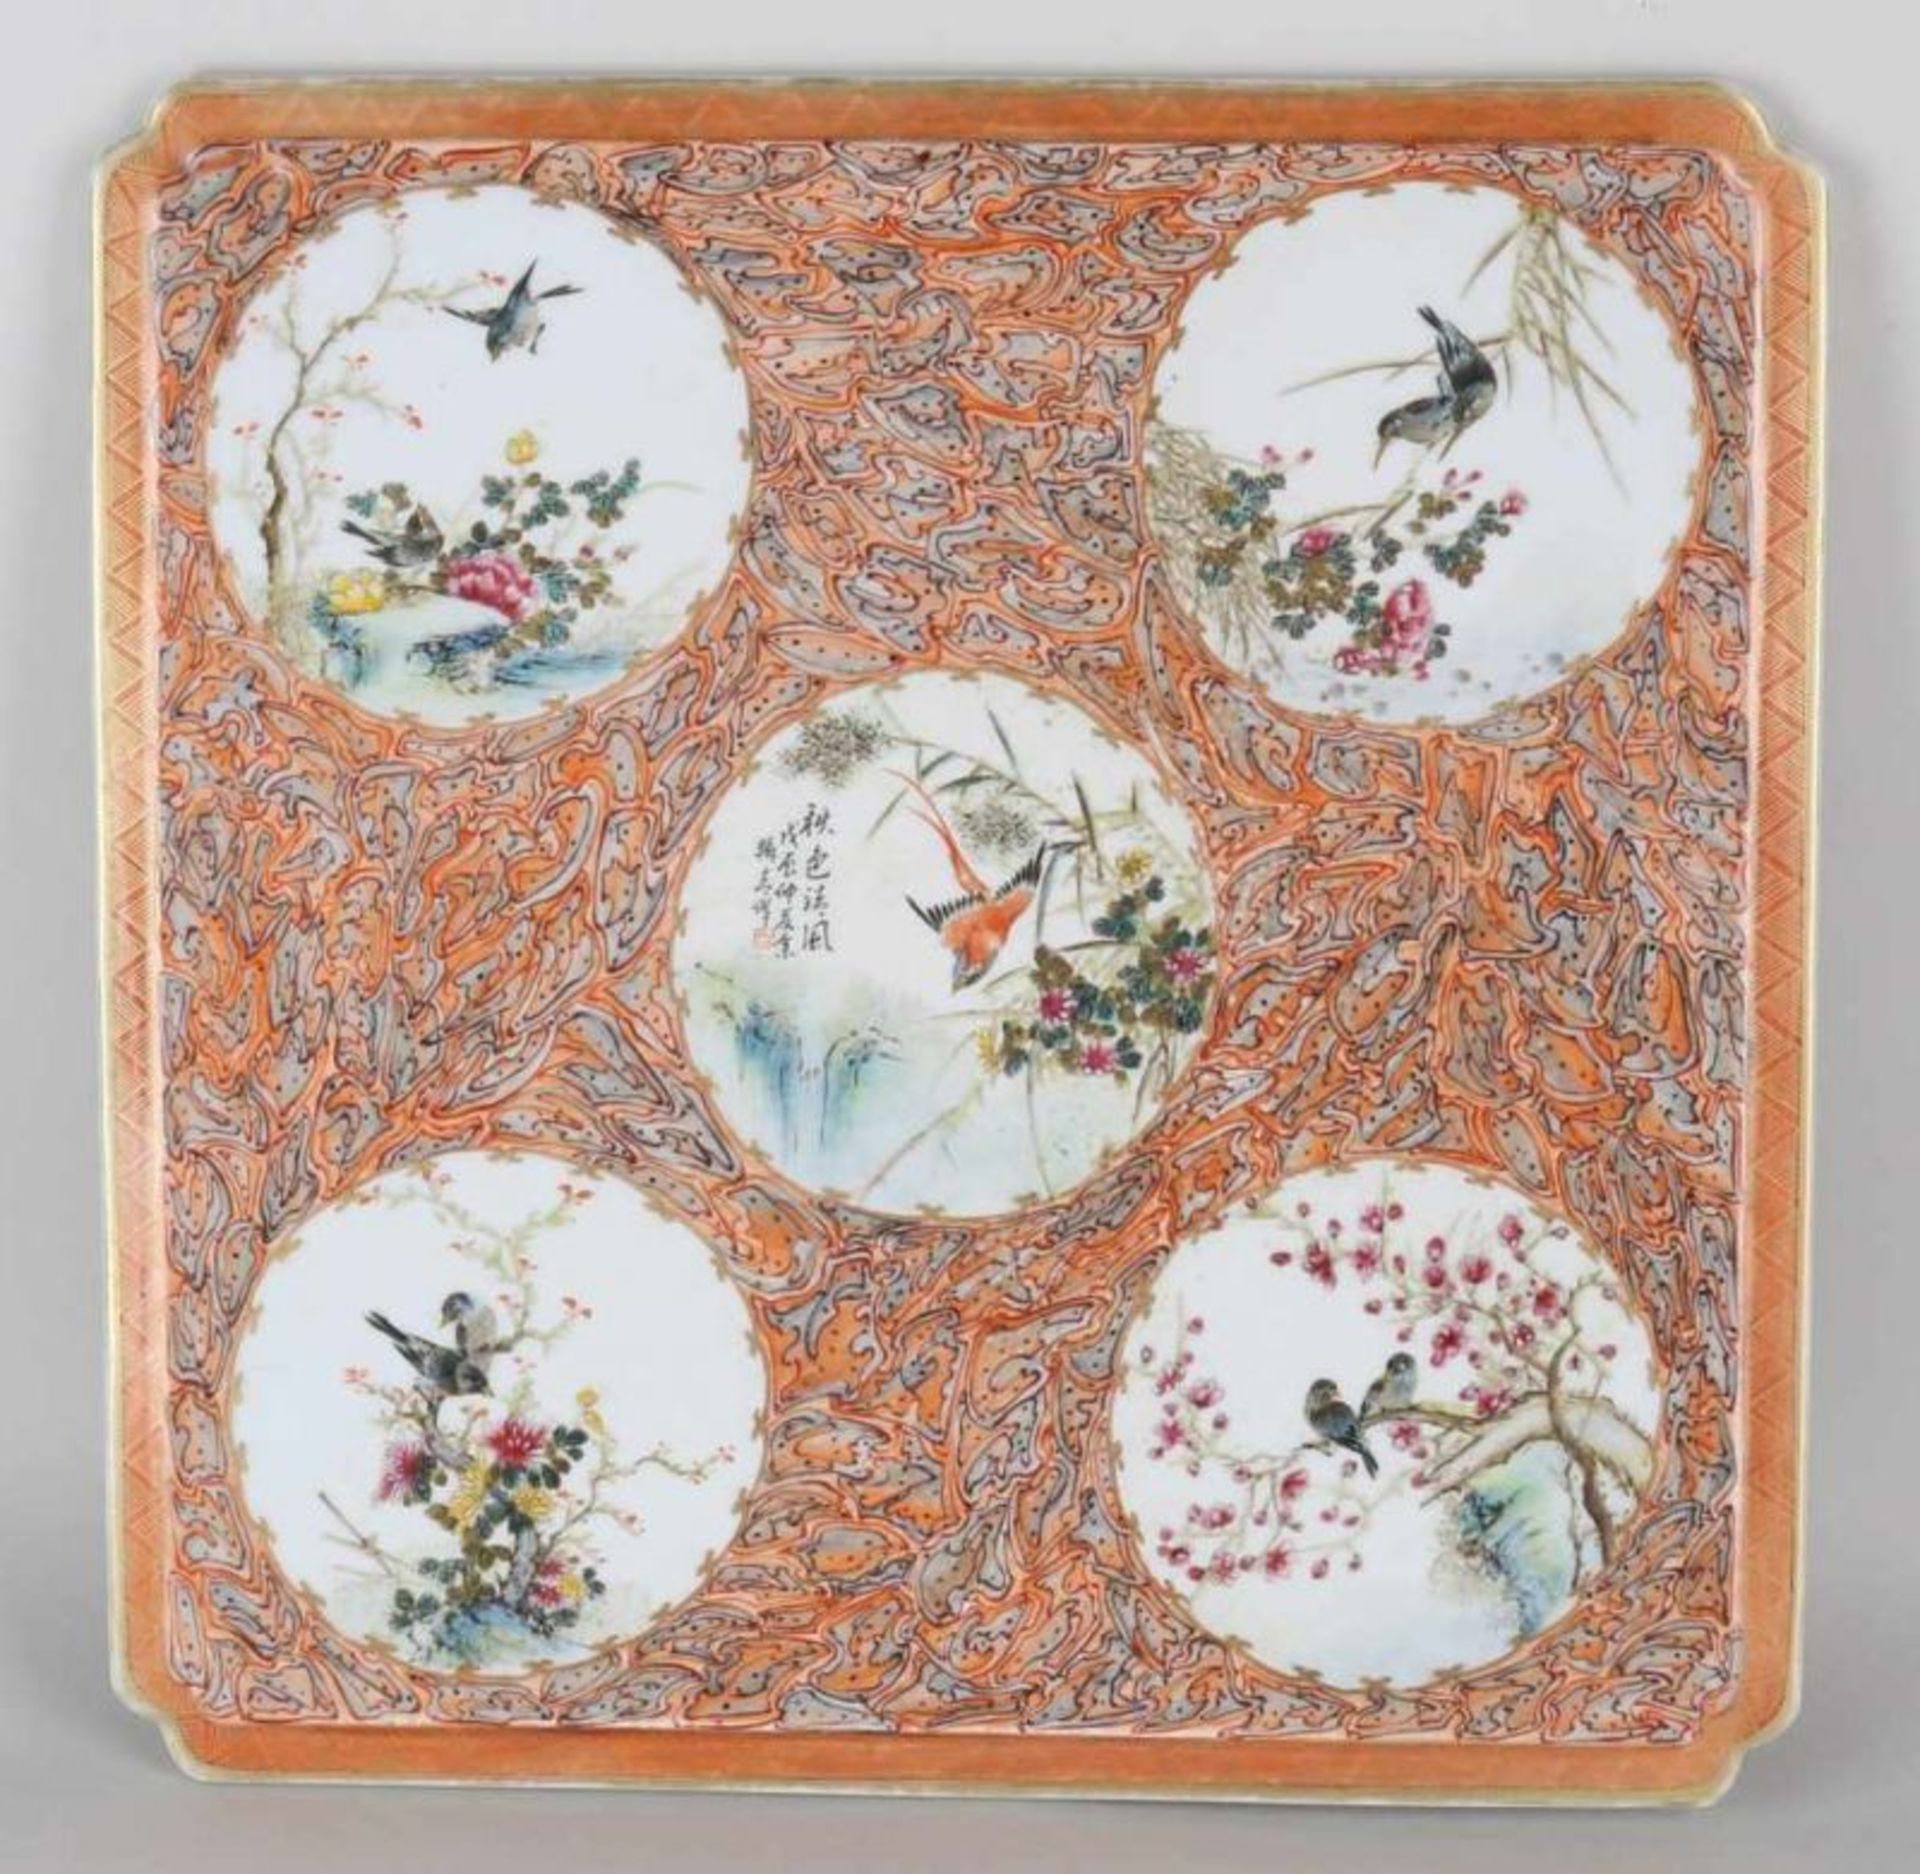 Large old Chinese porcelain Family Rose plaque with birds in medallions, text, signature and gold